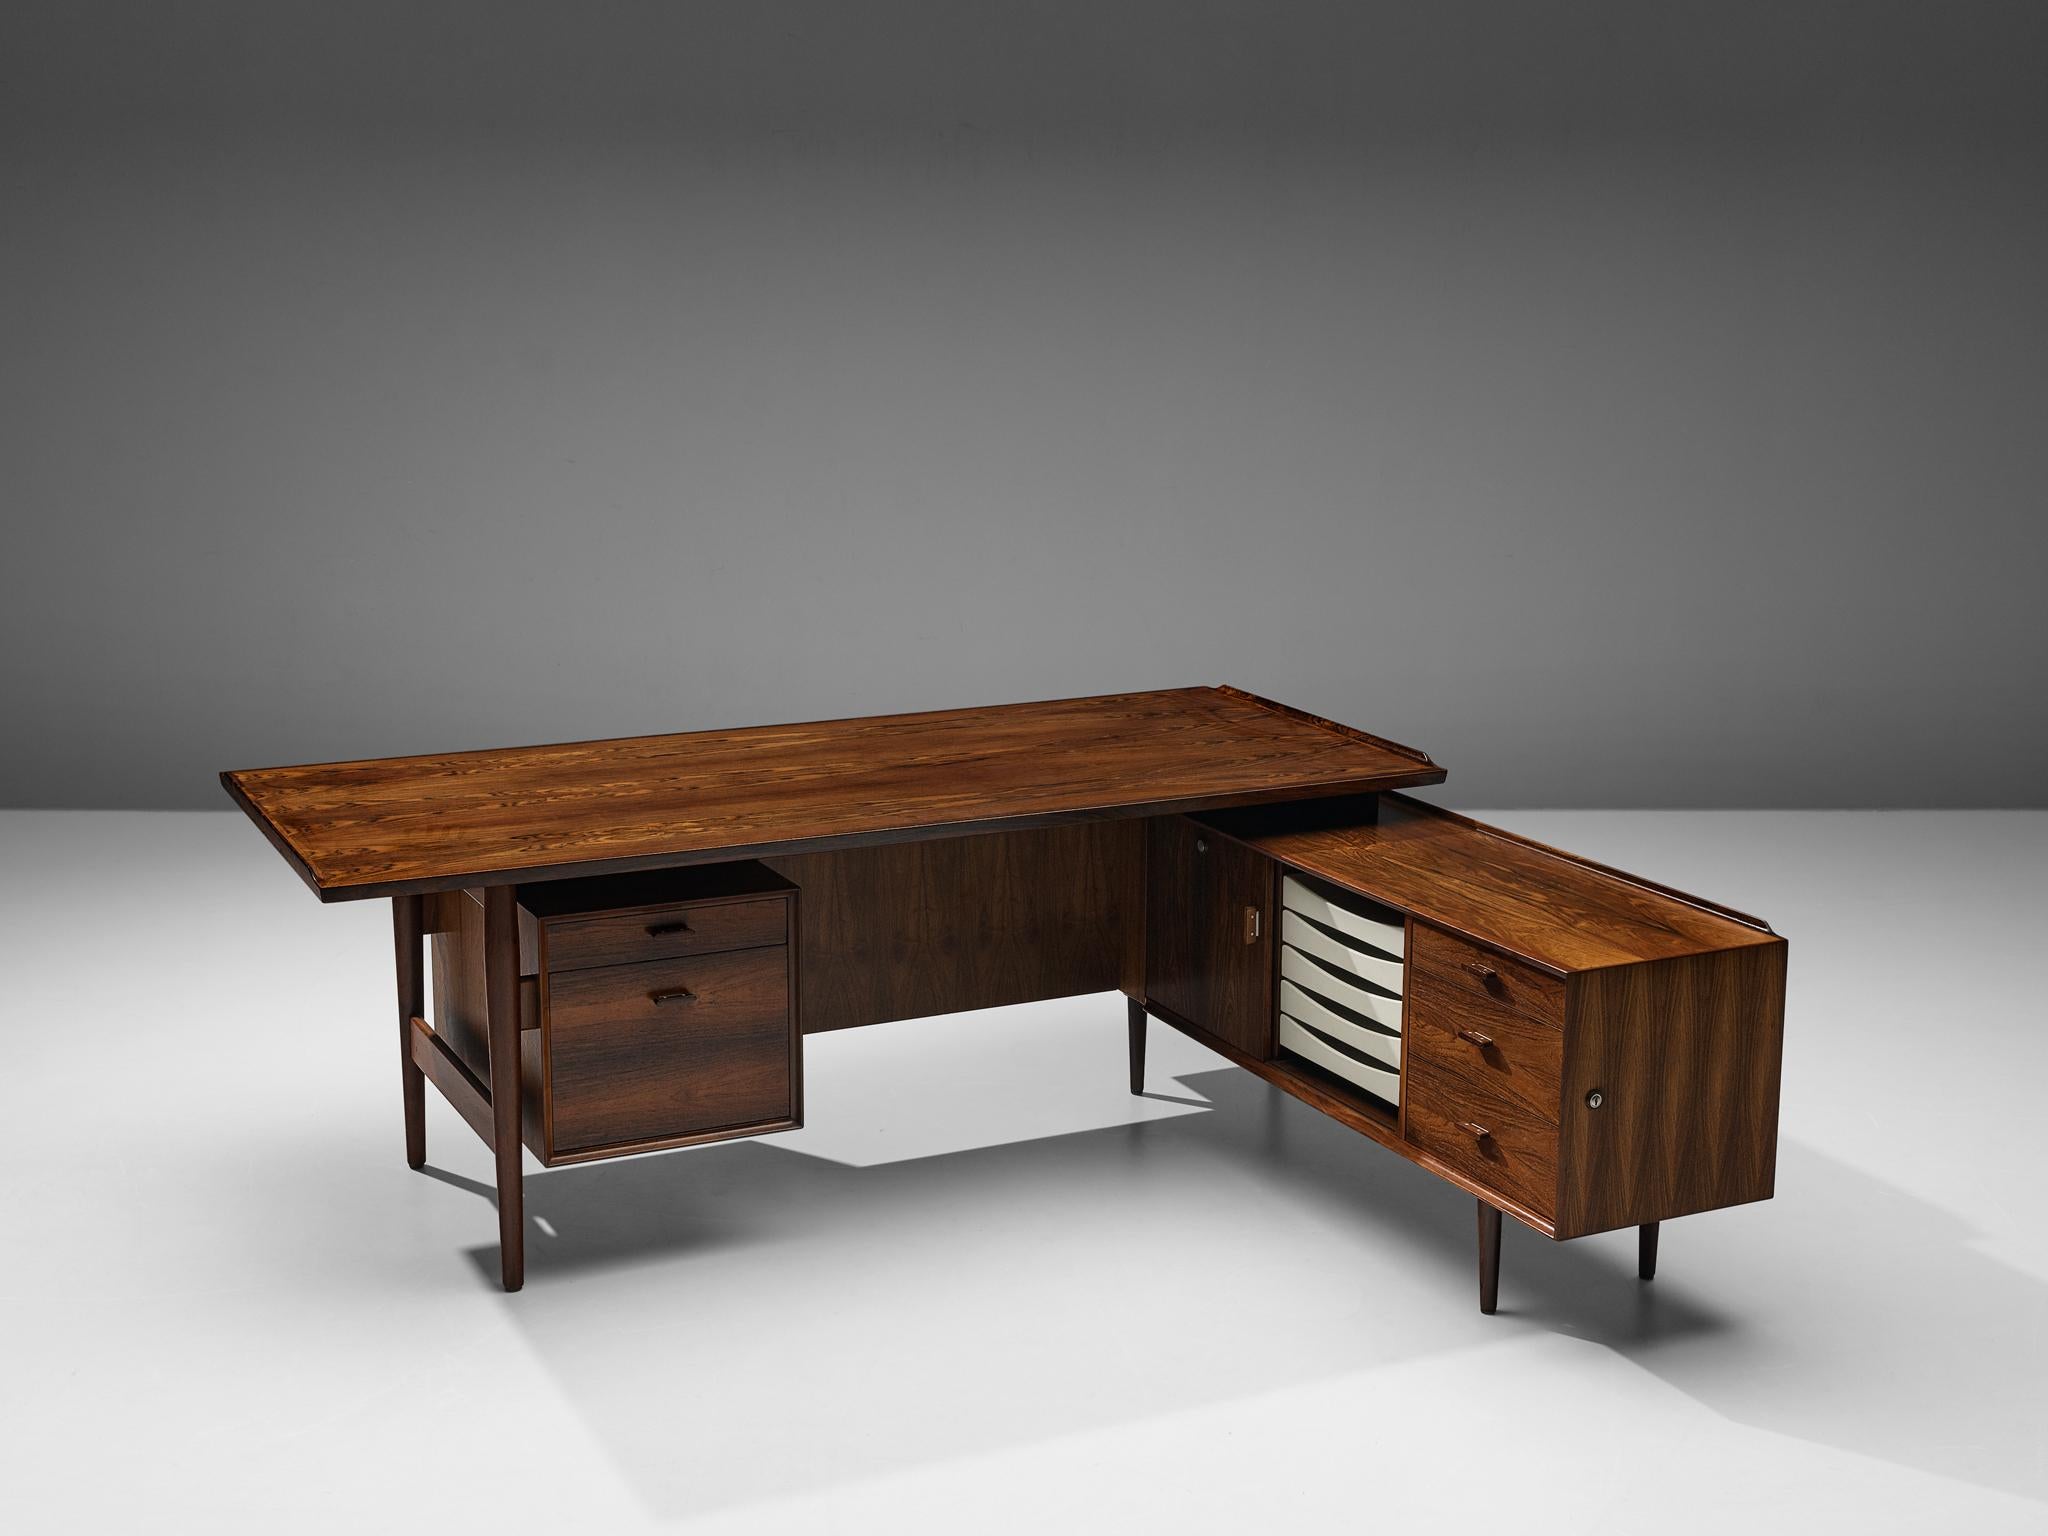 Arne Vodder for Sibast, corner desk, rosewood, Denmark, 1950s

Danish designer Arne Vodder created this functional, free-standing corner desk for Sibast. Rosewood with its beautiful natural grain gives this pieces a luxurious look. The desk with